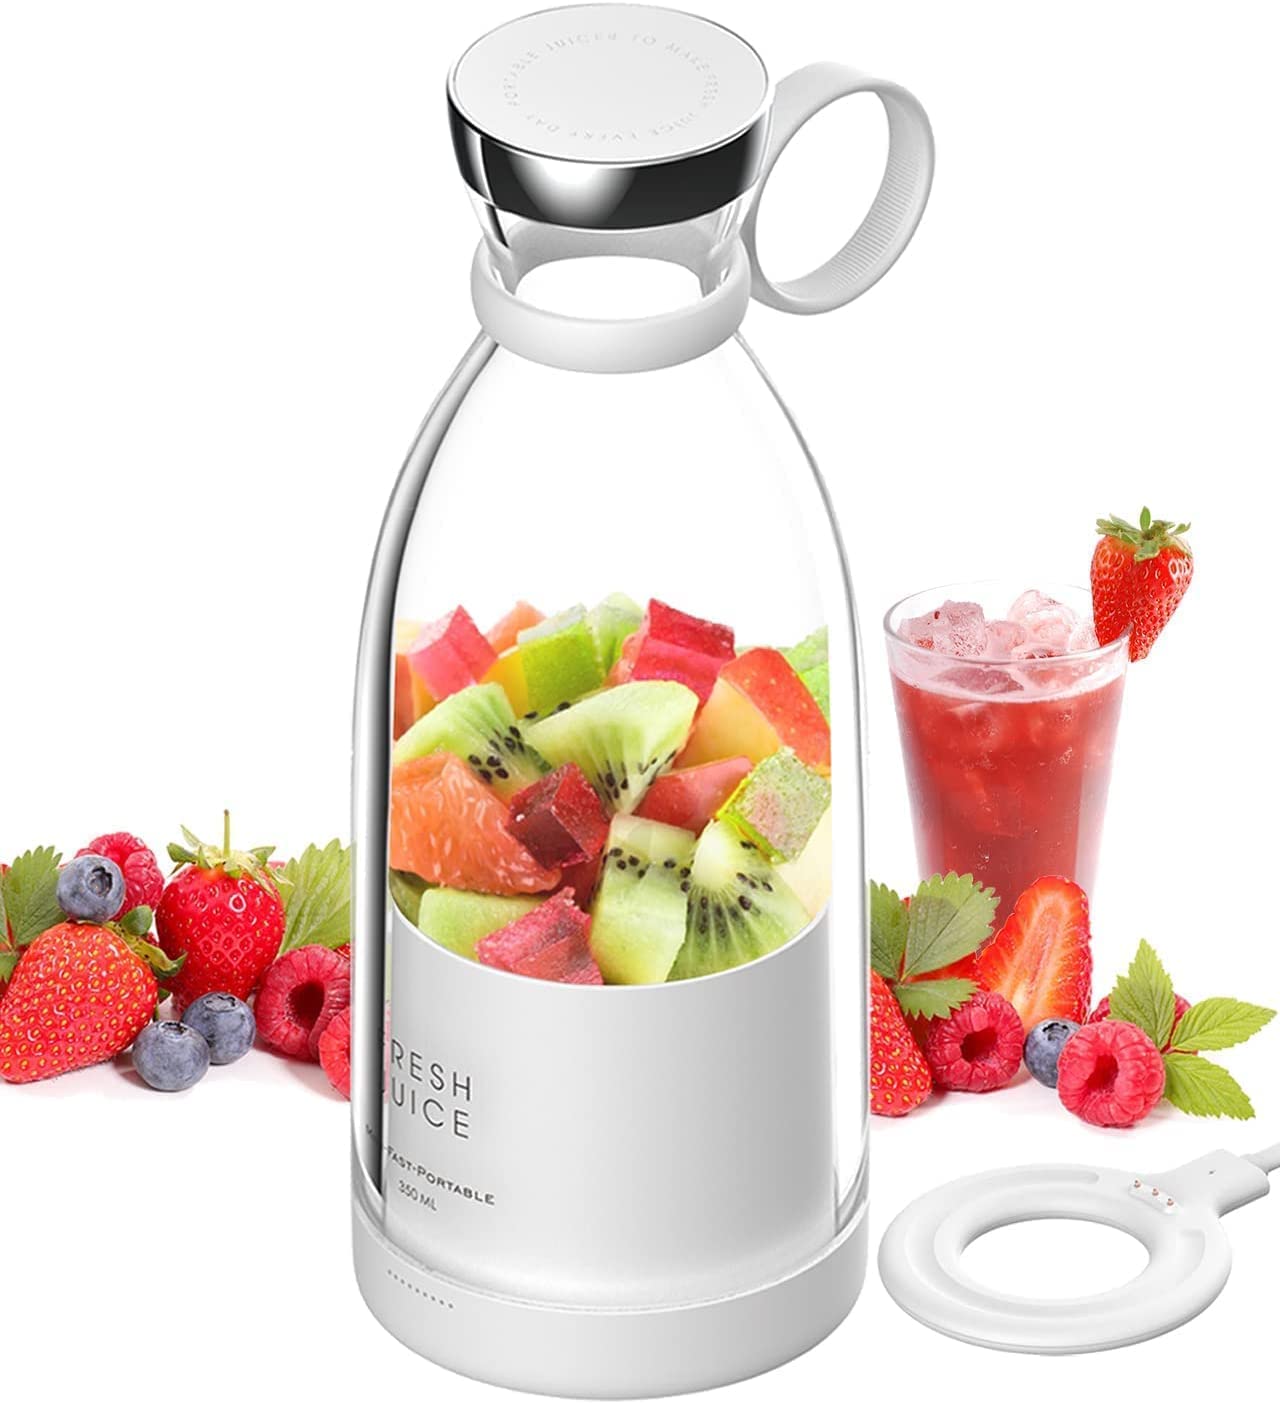 Loxis Portable Blender for Fresh Juice, Smoothies, Milkshakes, Bottle to Go, USB Charging, Mini Juicer, Mixer Smoothie Maker, with USB Rechargeable, BPA Free, 350 ml - White